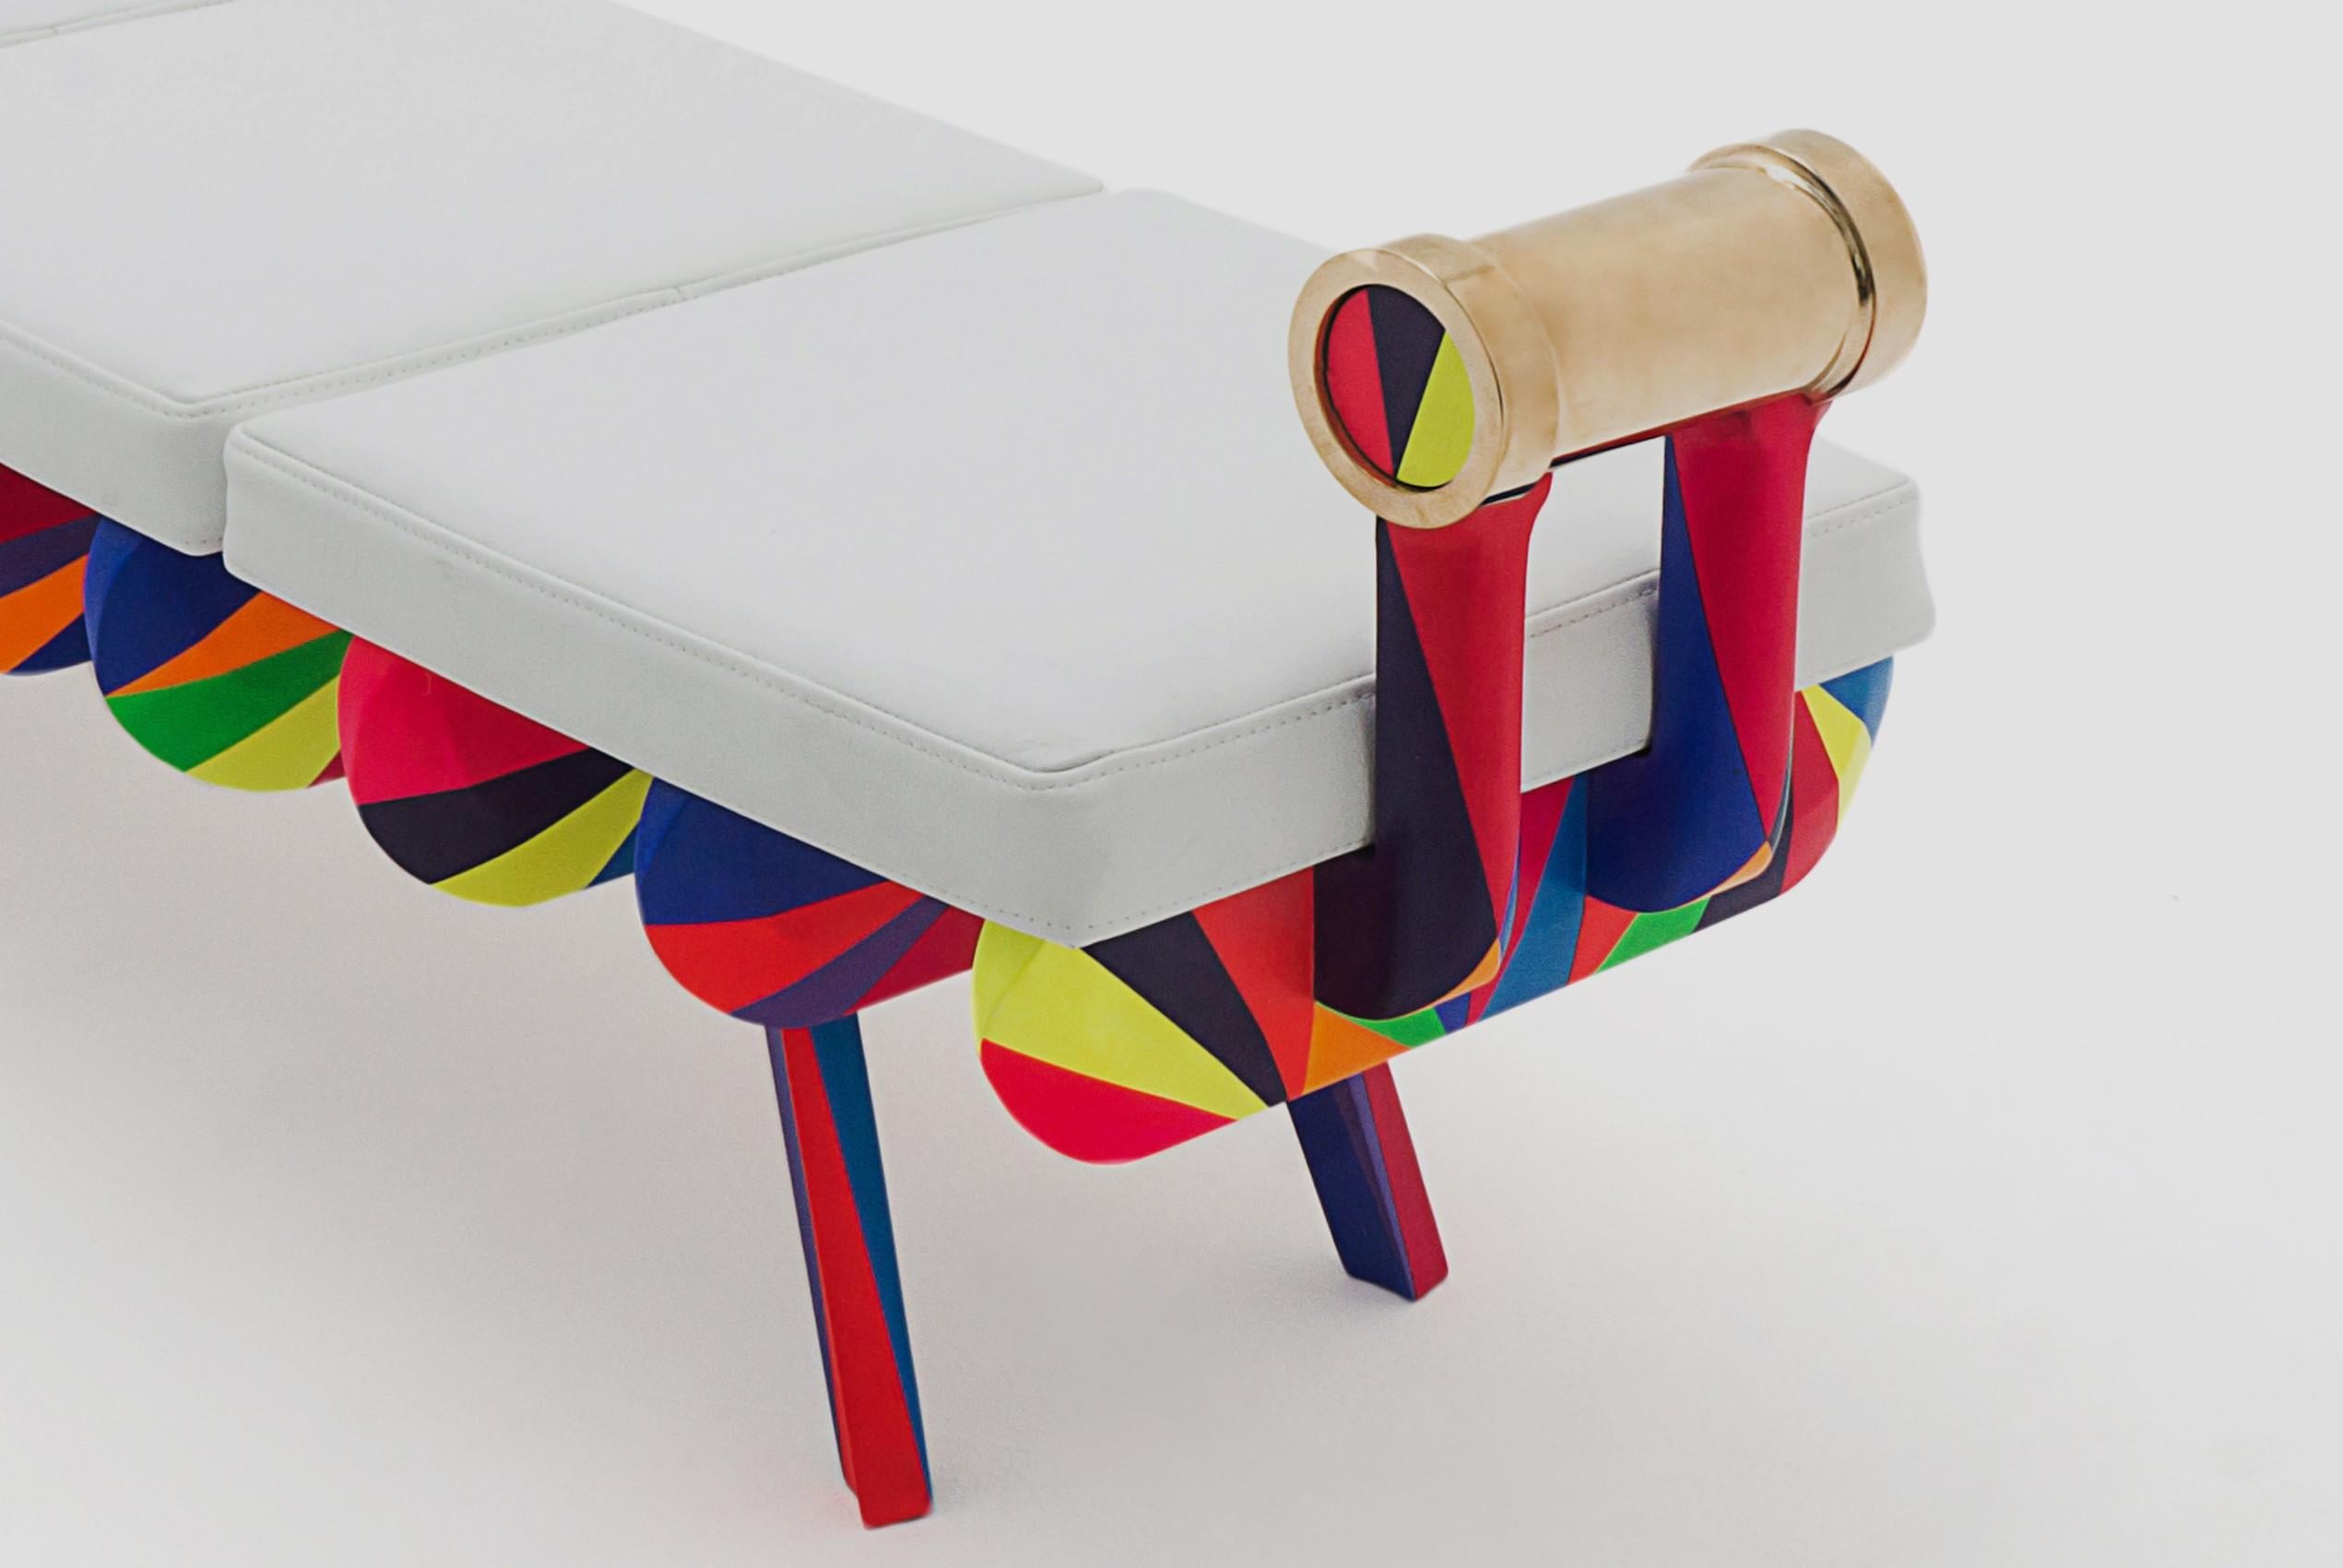 Lacquered Special Edition Gor Bench II by Arturo Verástegui For Sale